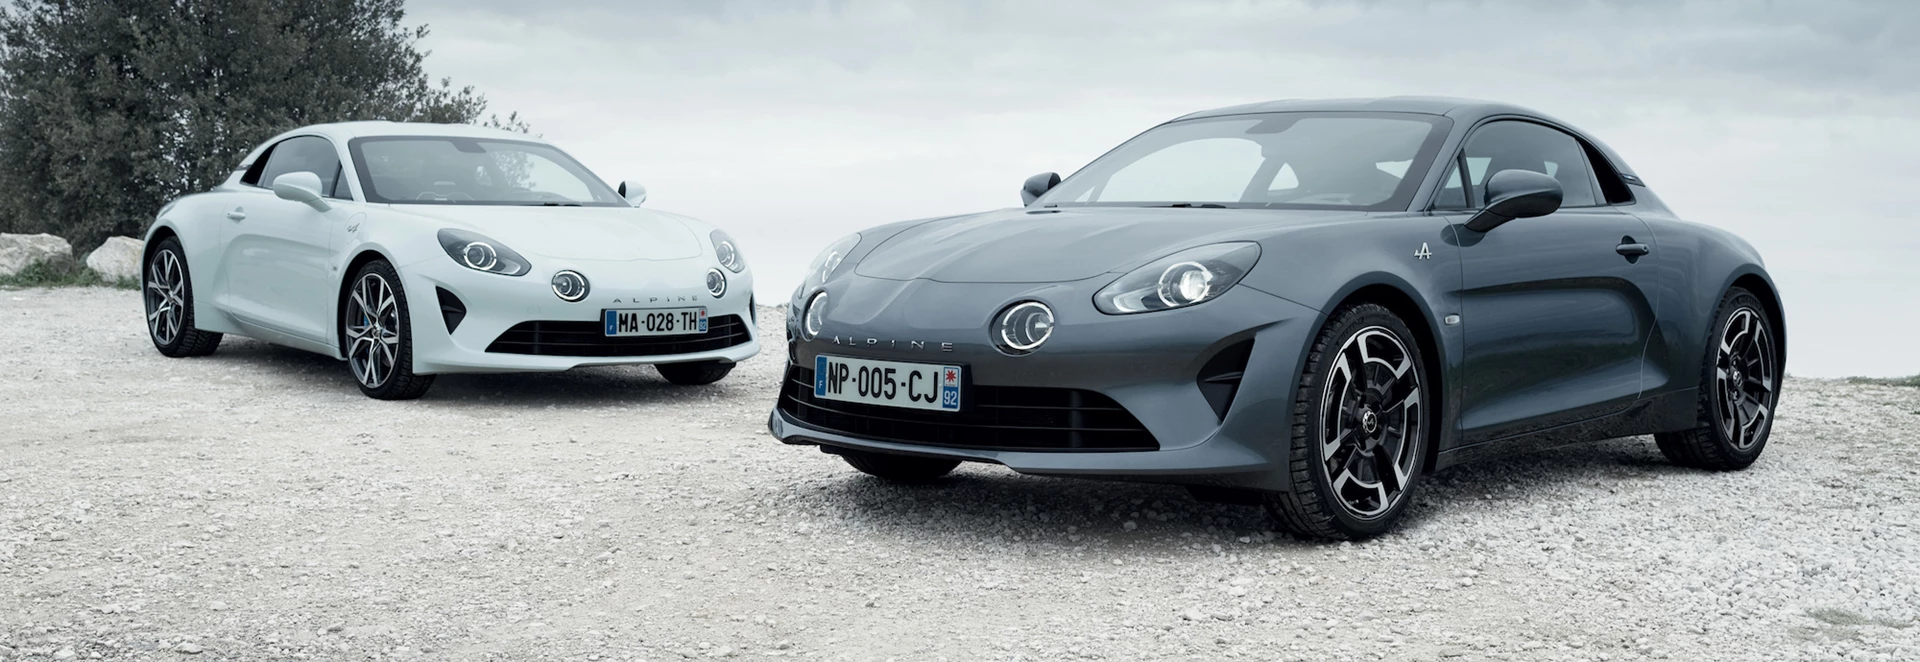 Alpine A110 Pure and Legende editions revealed  